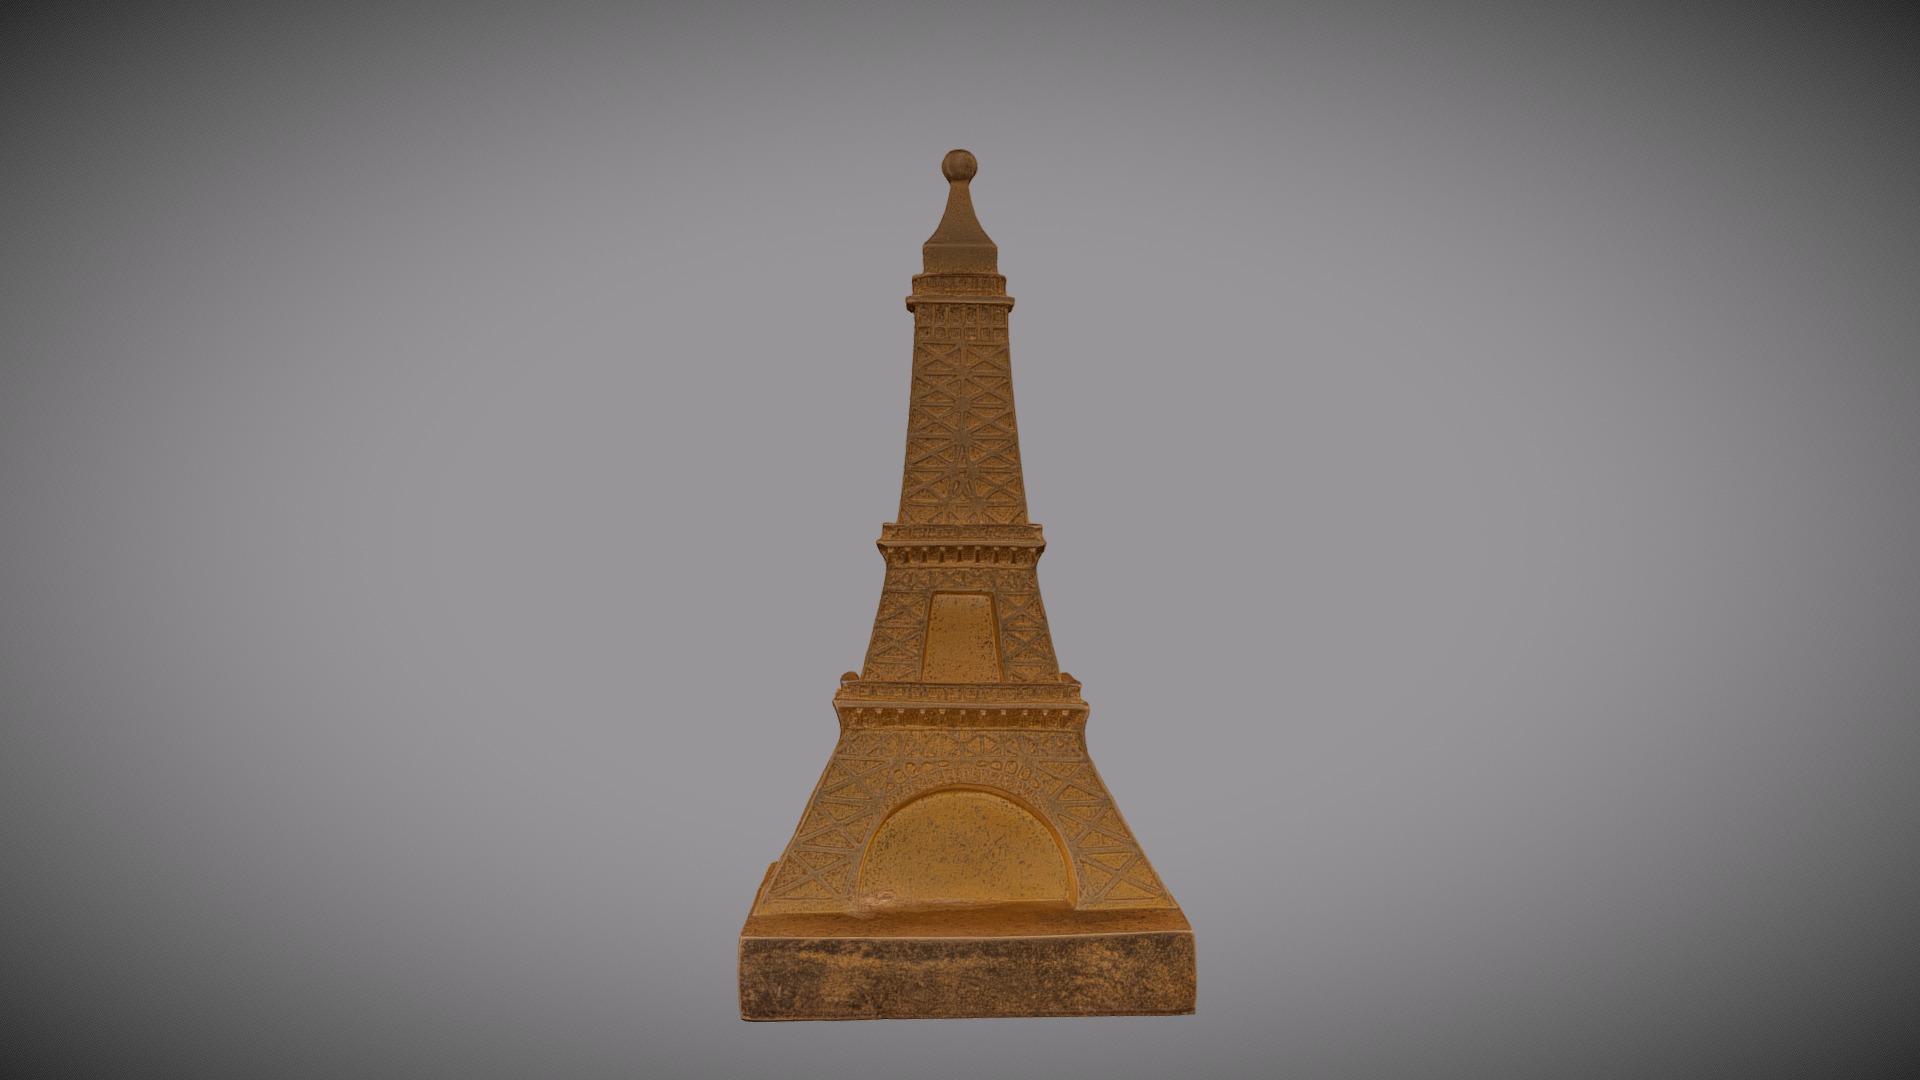 3D model Gold Eiffel Tower Bookend - This is a 3D model of the Gold Eiffel Tower Bookend. The 3D model is about a gold tower with a gold top.